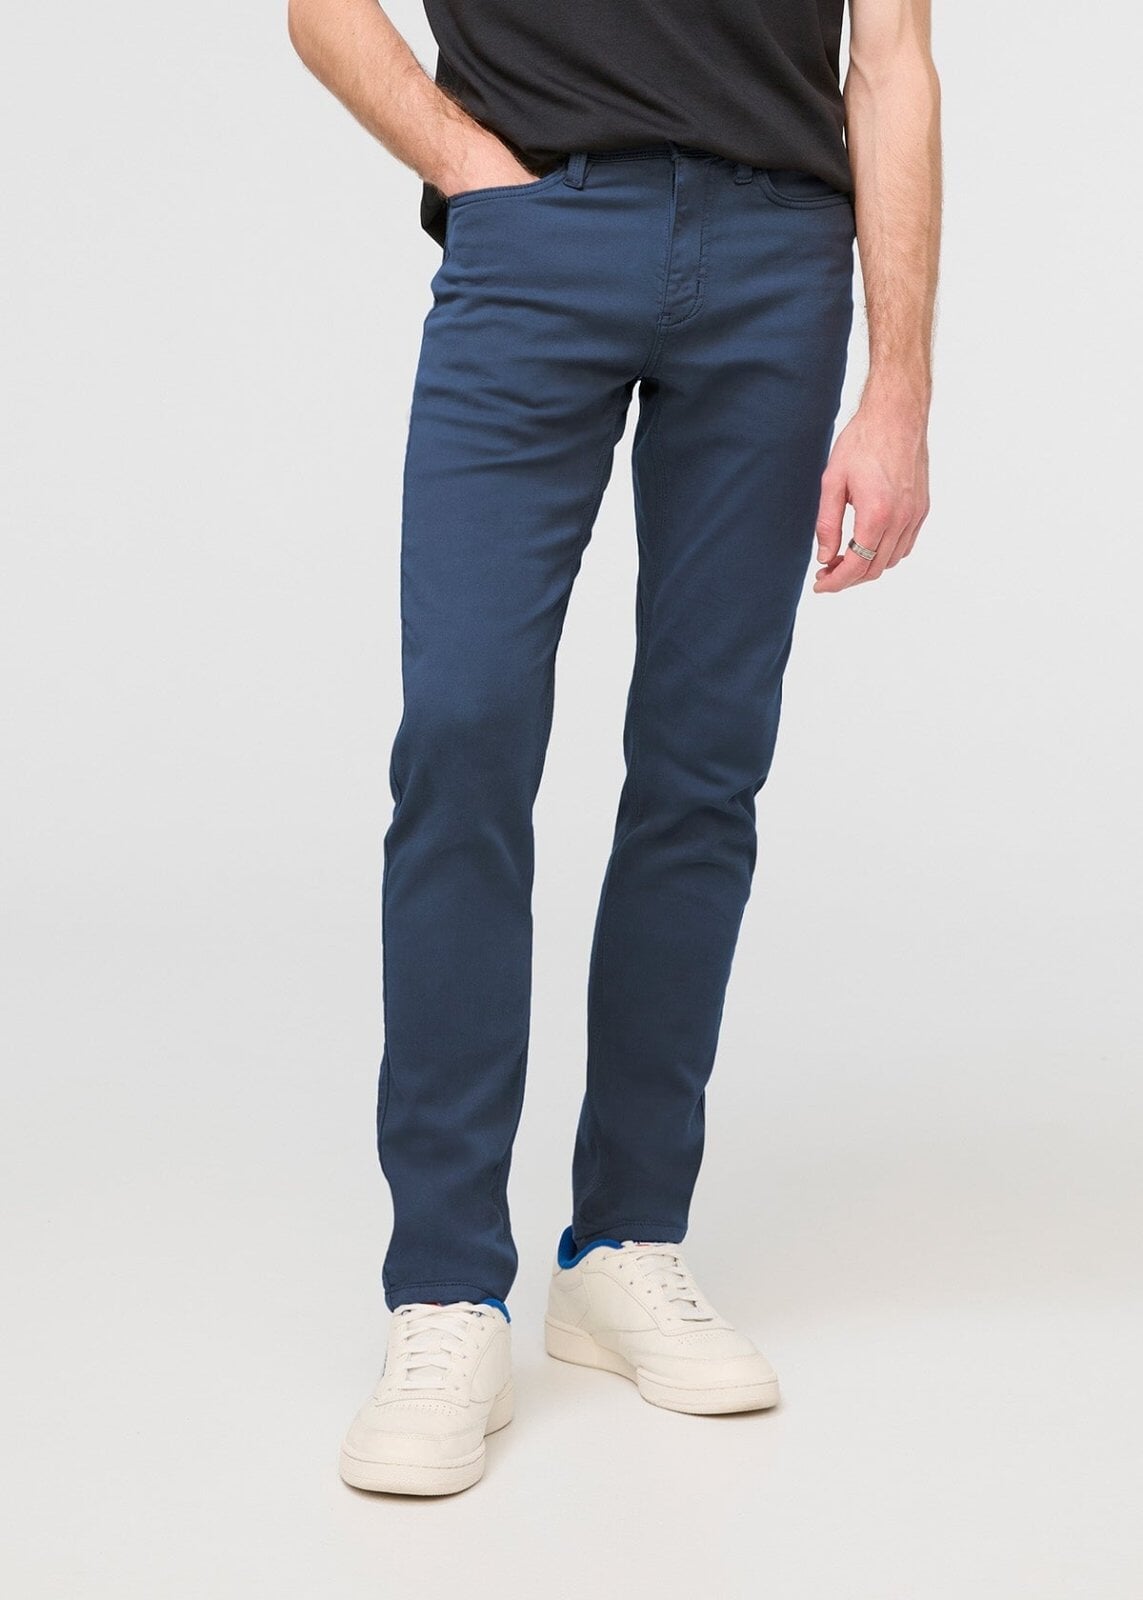 Men's Slim Fit Jeans & Pants - DUER – Tagged 